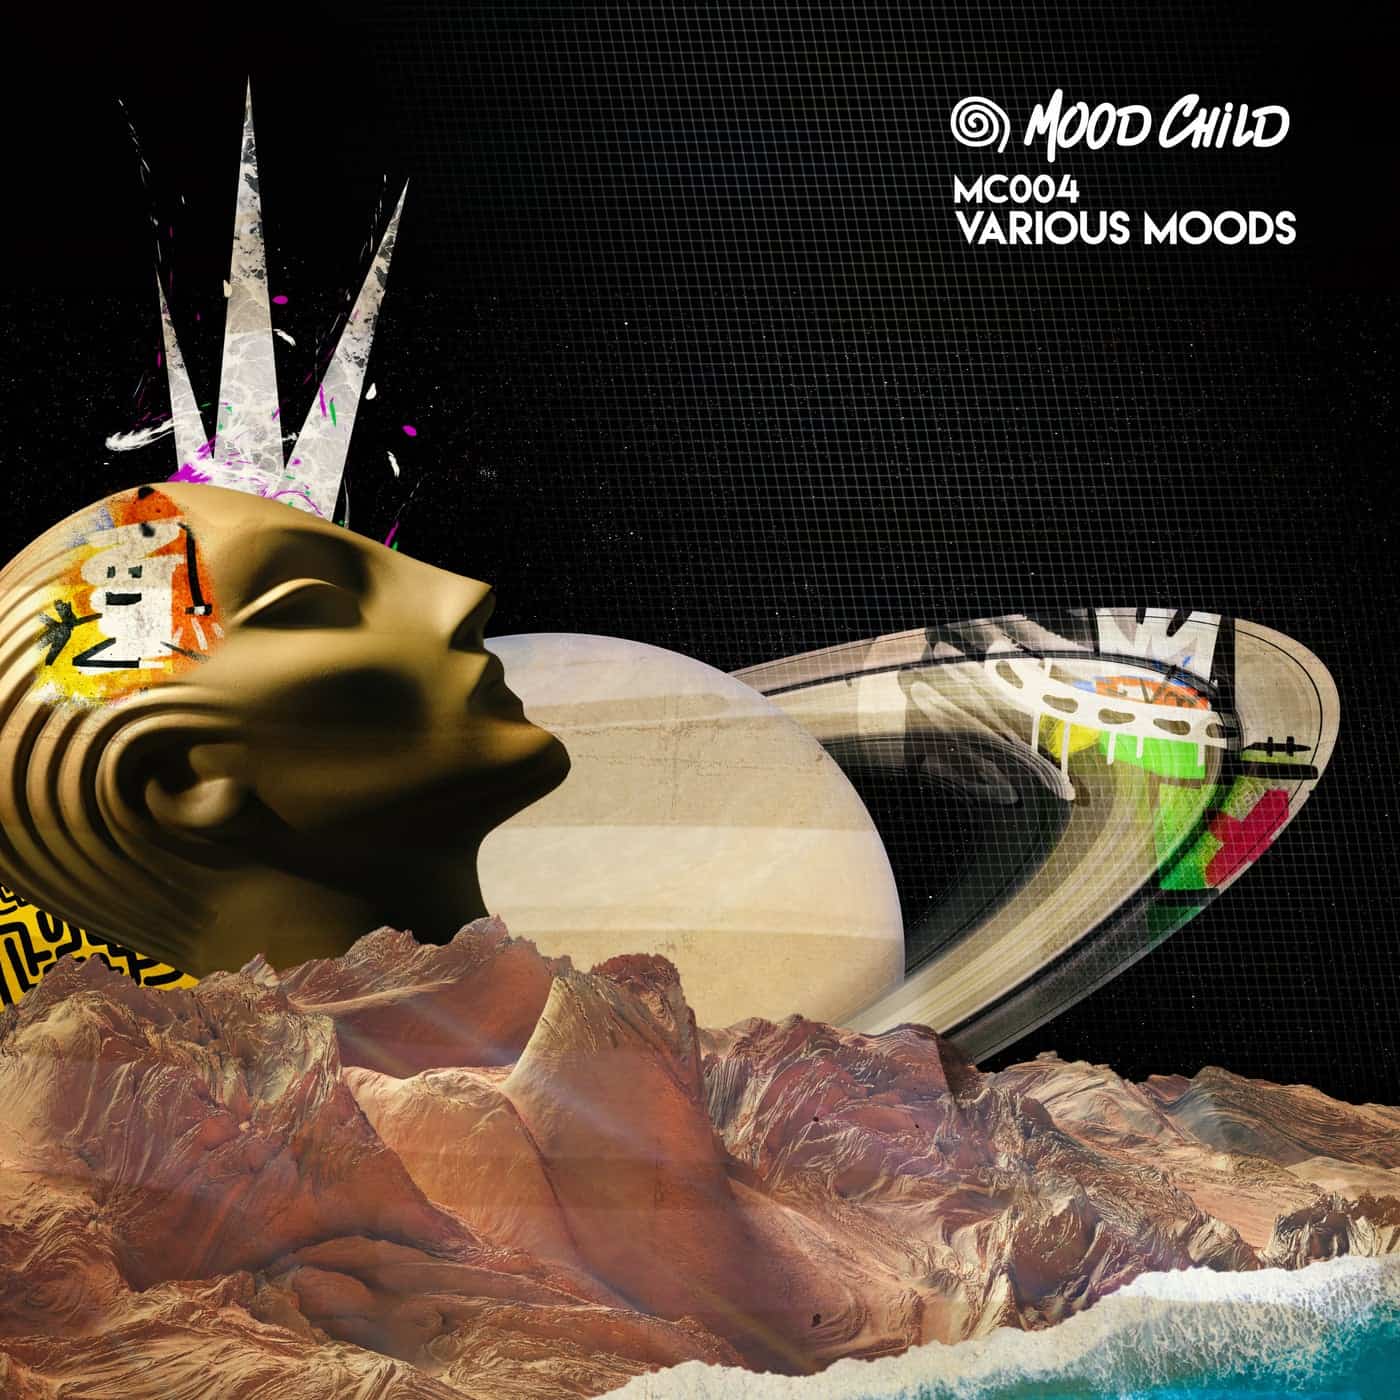 image cover: VA - Various Moods on Mood Child